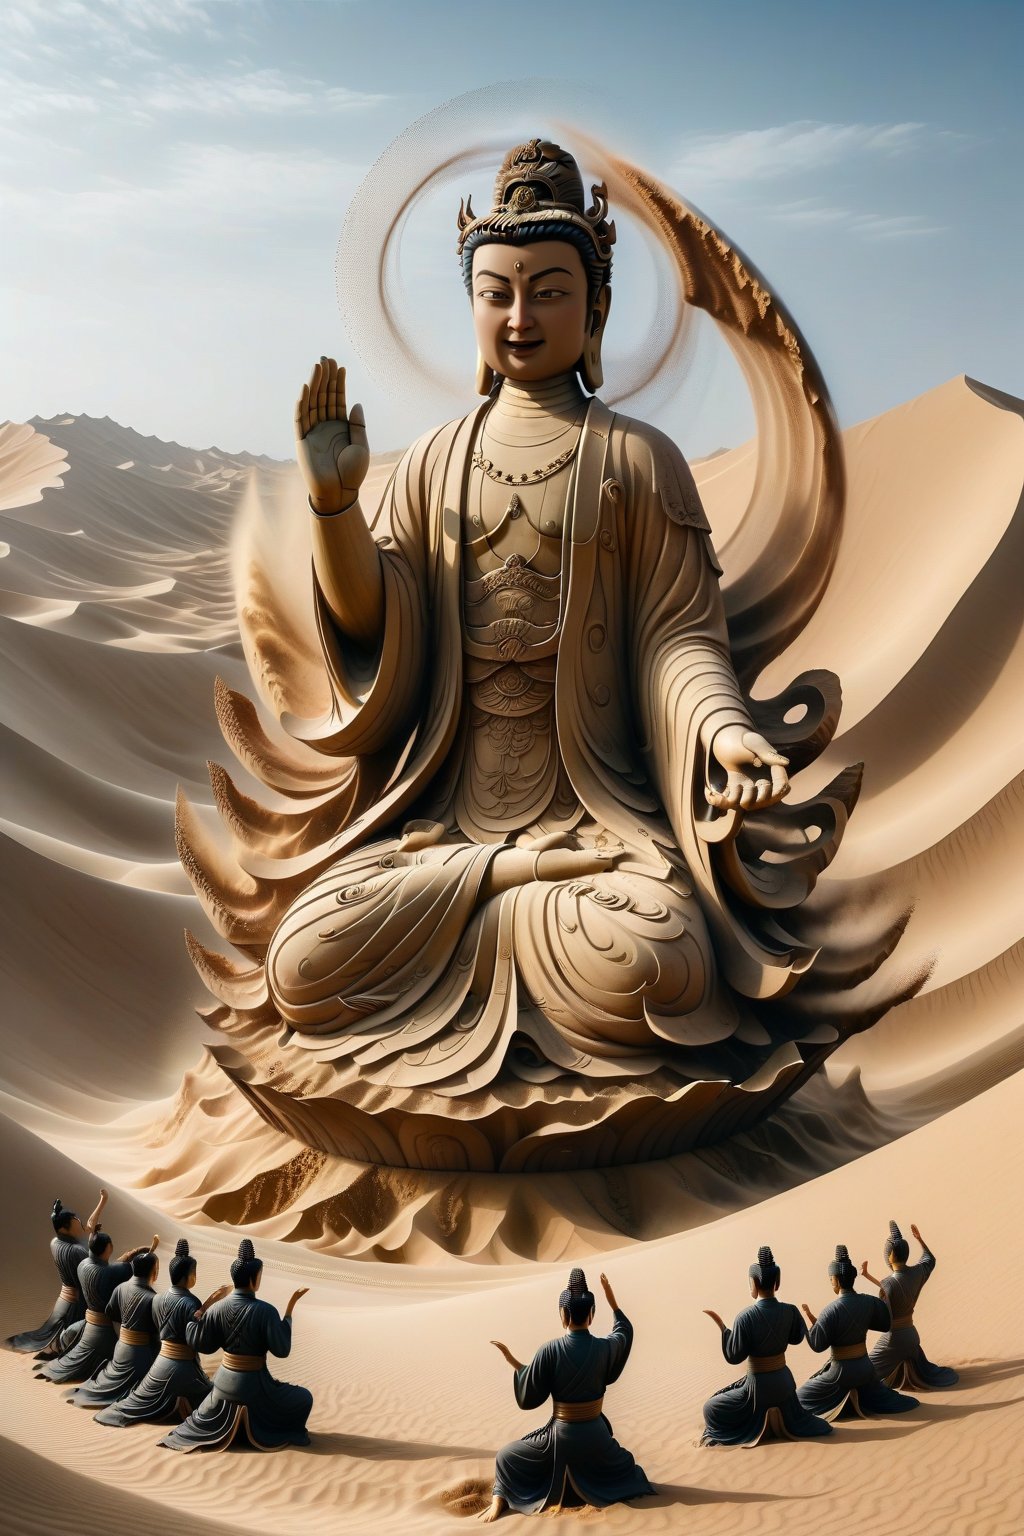 A ninja in realistic style performing Earth-style ninjutsu in the desert, summoning a grand and massive Thousand-Handed Guanyin Buddha statue made of sand and earth. The statue is towering and majestic, with countless detailed hands extending in all directions, each hand demonstrating a different symbolic gesture. The serene and compassionate expression of Guanyin adds a profound sense of peace to the scene. The backdrop is a vast desert landscape, with towering dunes under a clear sky, emphasizing the epic scale and spiritual significance of the summoned sand Guanyin statue.